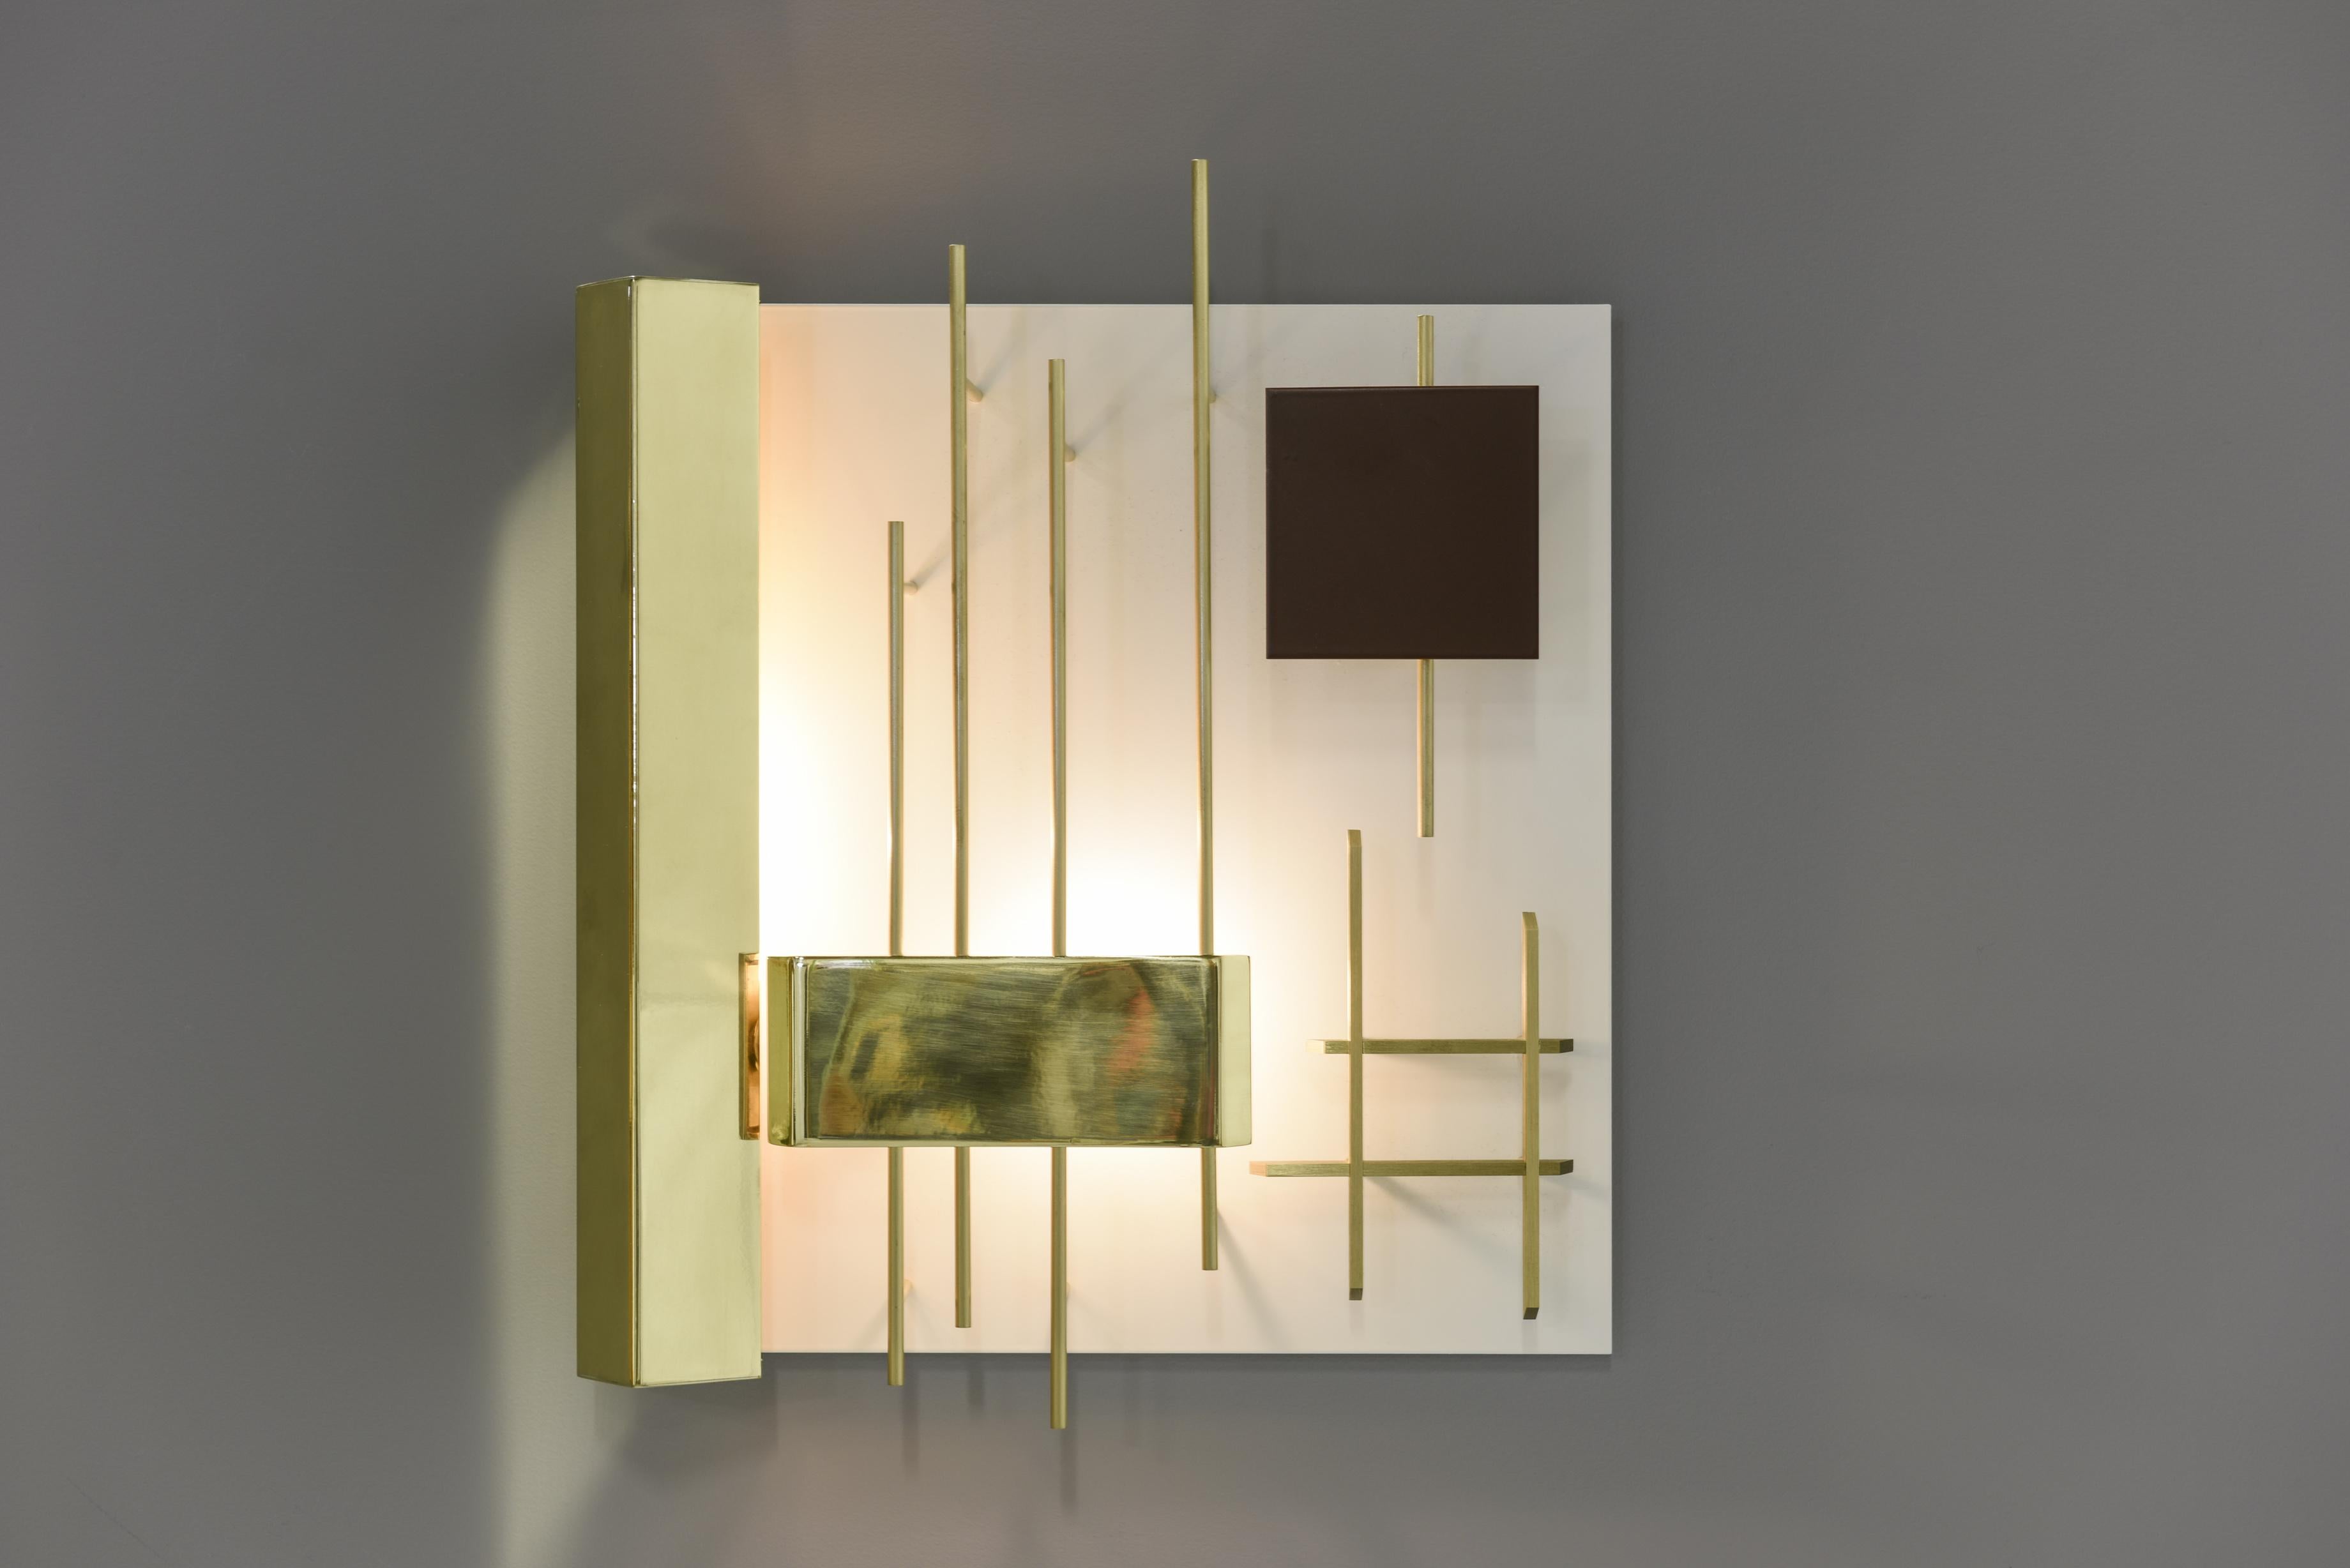 Elegant square wall sconces by the one of the famous designer and architect from Italy.
Very graphic lamps in brass and metal lacquered. The light hidden on the left side creates play of light on the lamp and wall.

Signed with applied brass